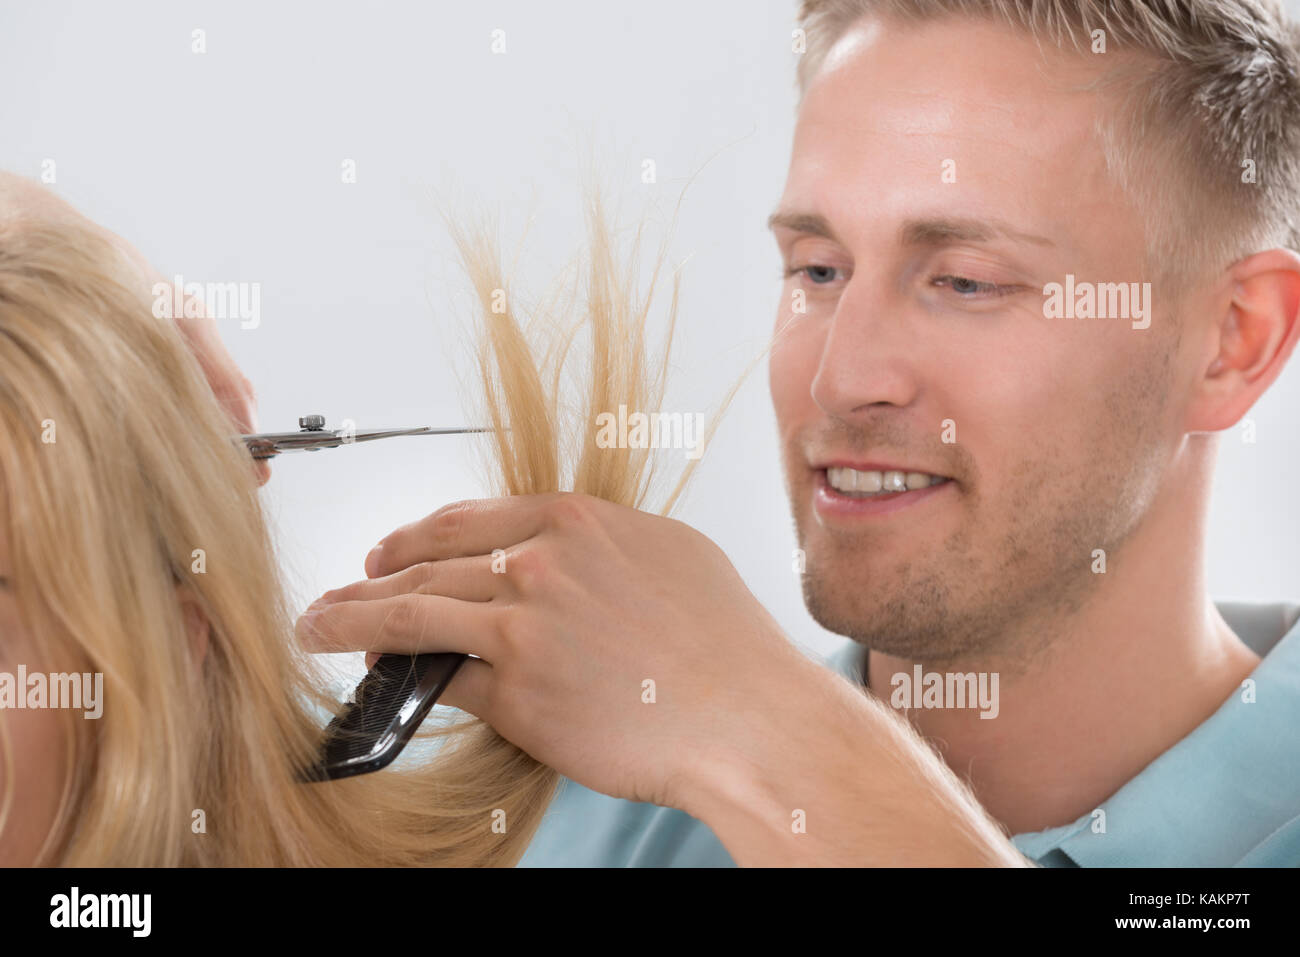 Happy young male hairdresser cutting customer's hair at salon Banque D'Images